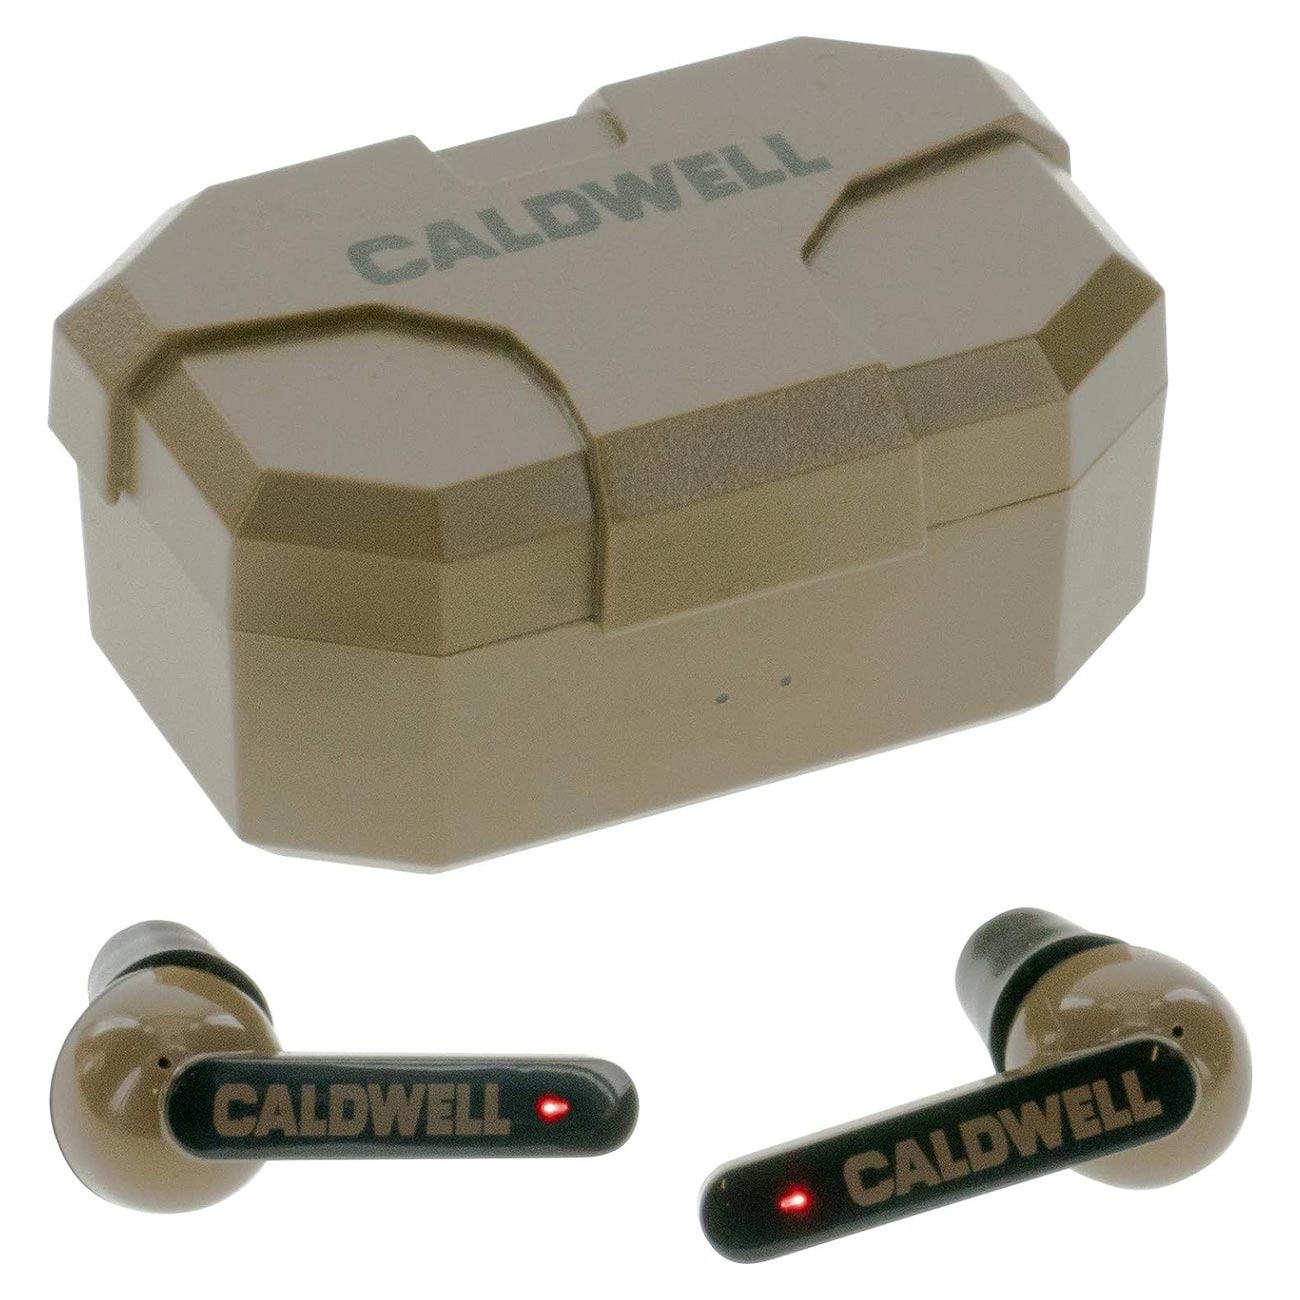 Caldwell E-MAX Shadows 23 NRR - Electronic Hearing Protection with Bluetooth (Color: FDE)